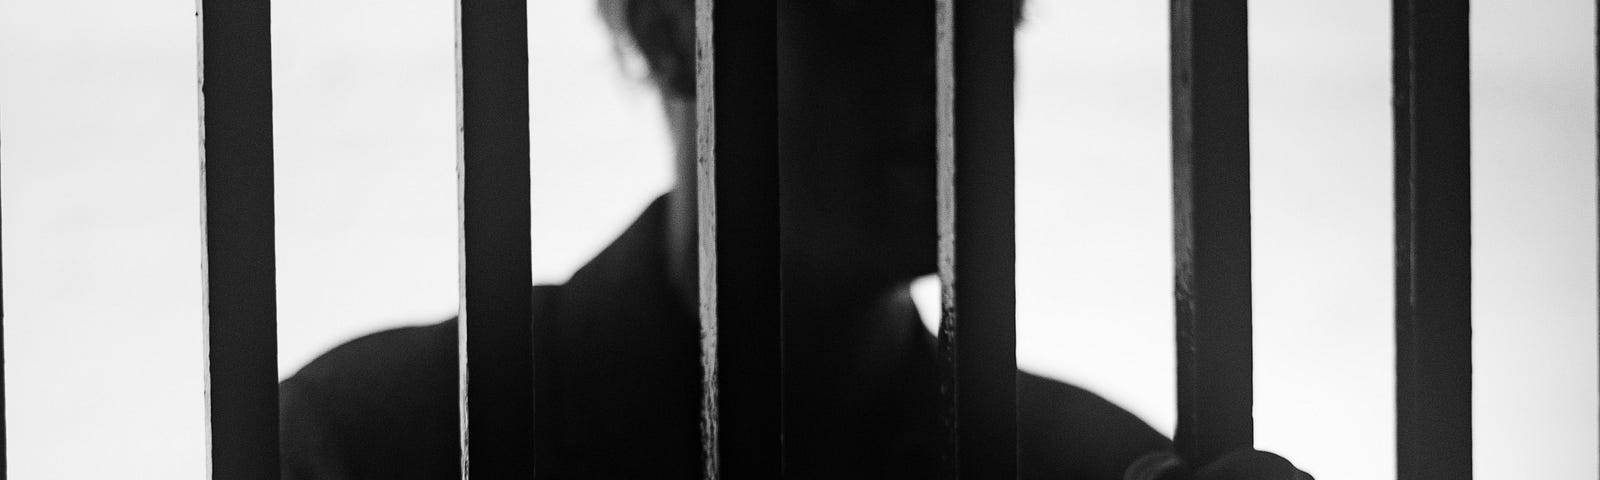 A profile of a man is seen behind bars